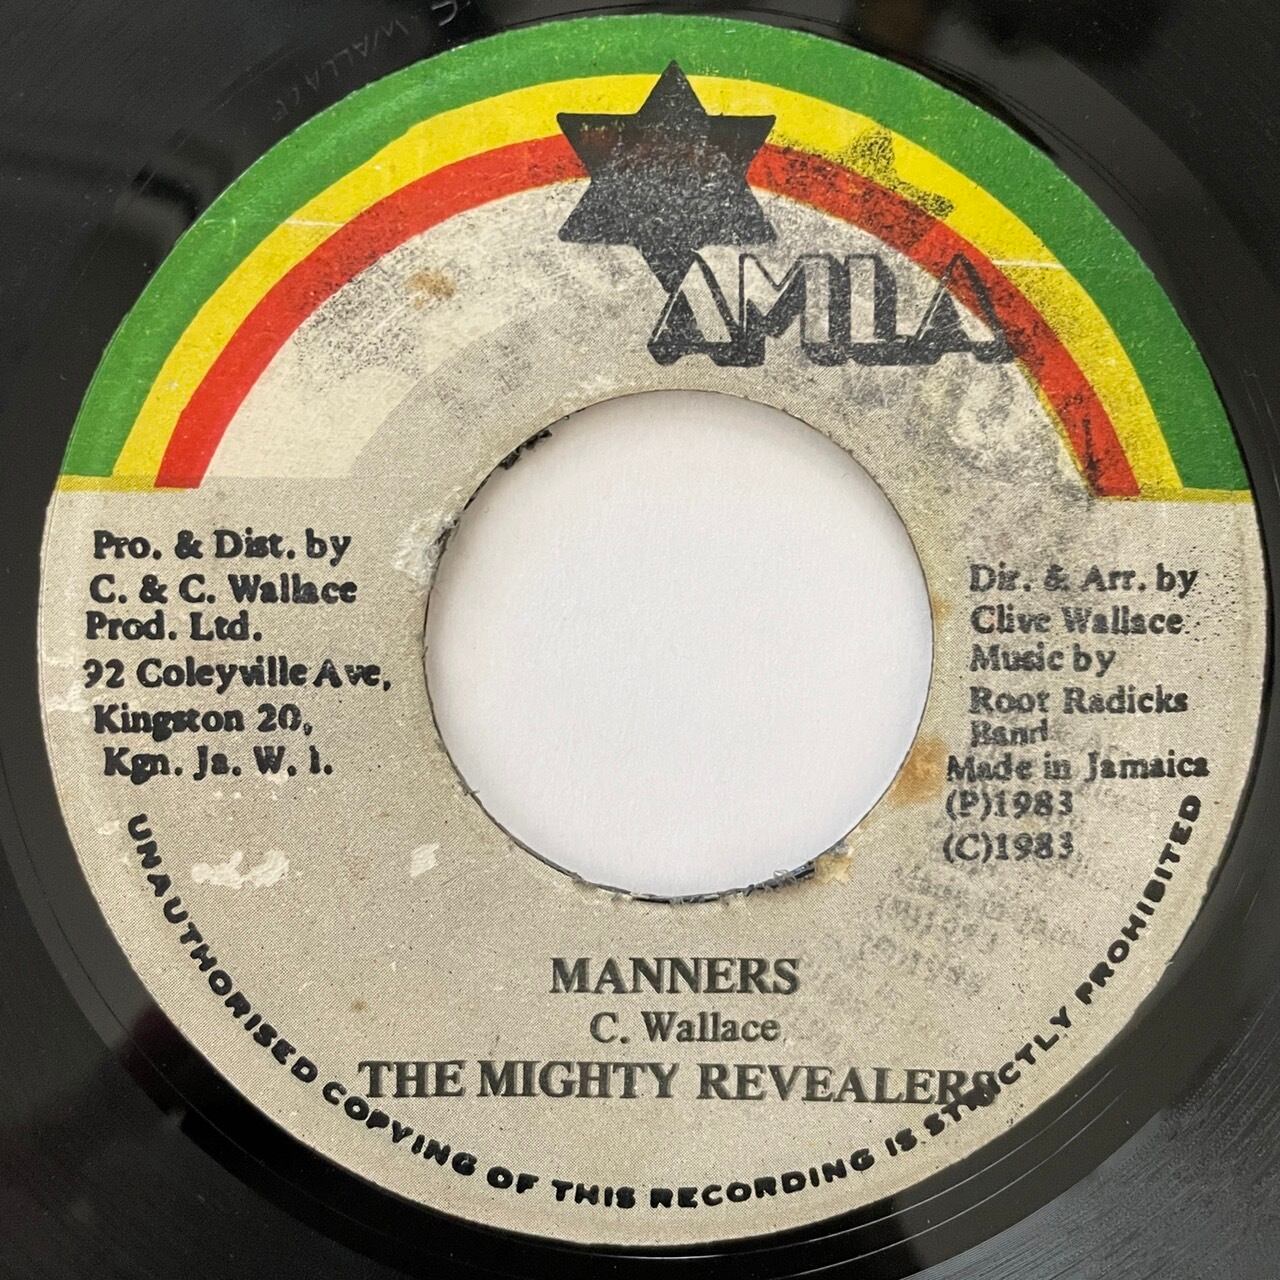 The Mighty Revealers, The Roots Radicks Band - Manners【7-20852】